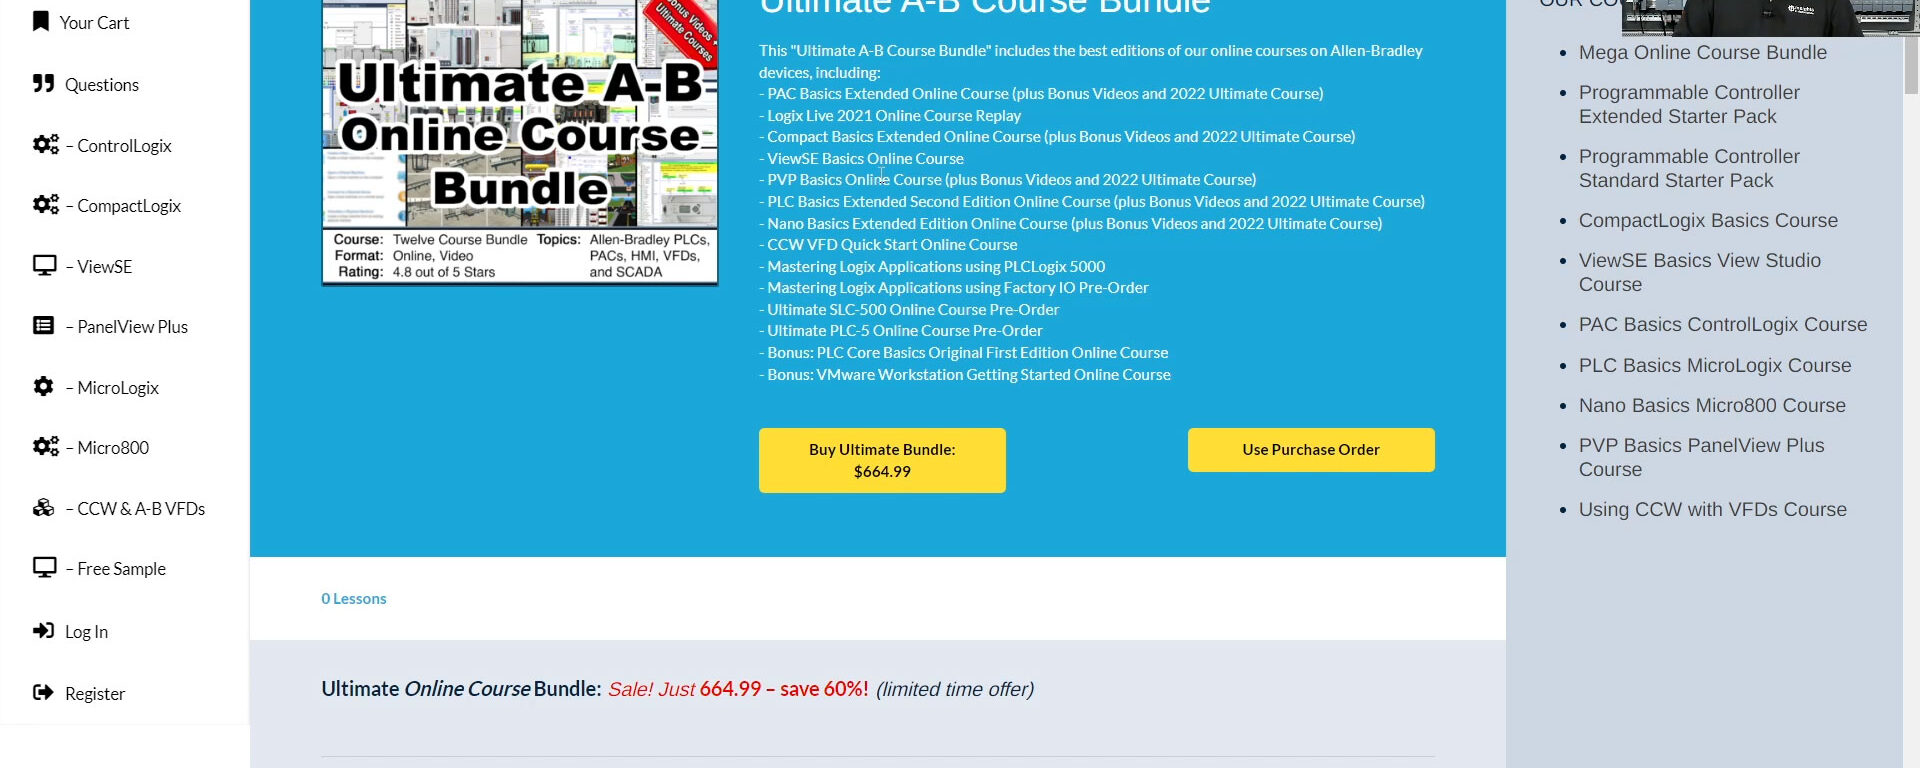 Featured Product: Ultimate A-B Online Course Bundle